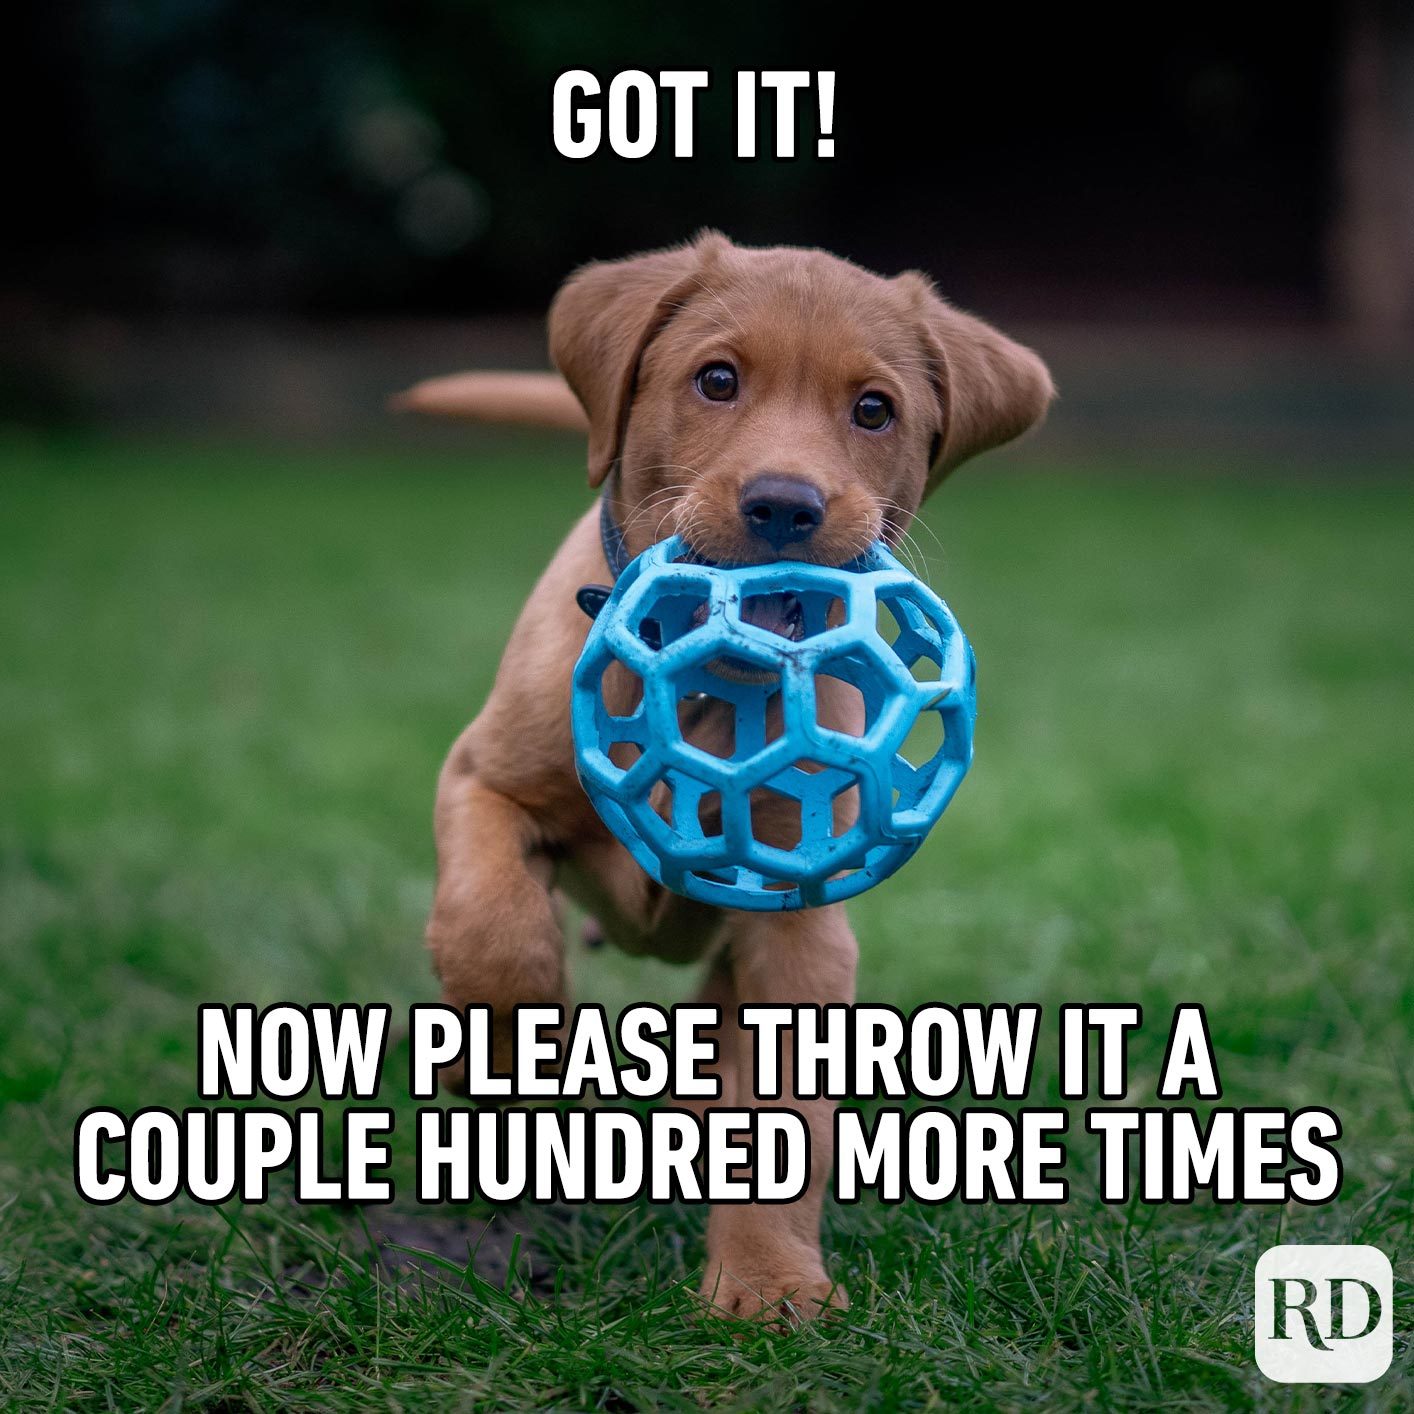 Dog holding a ball toward camera. Meme text: Got it! Now please throw it a couple hundred more times